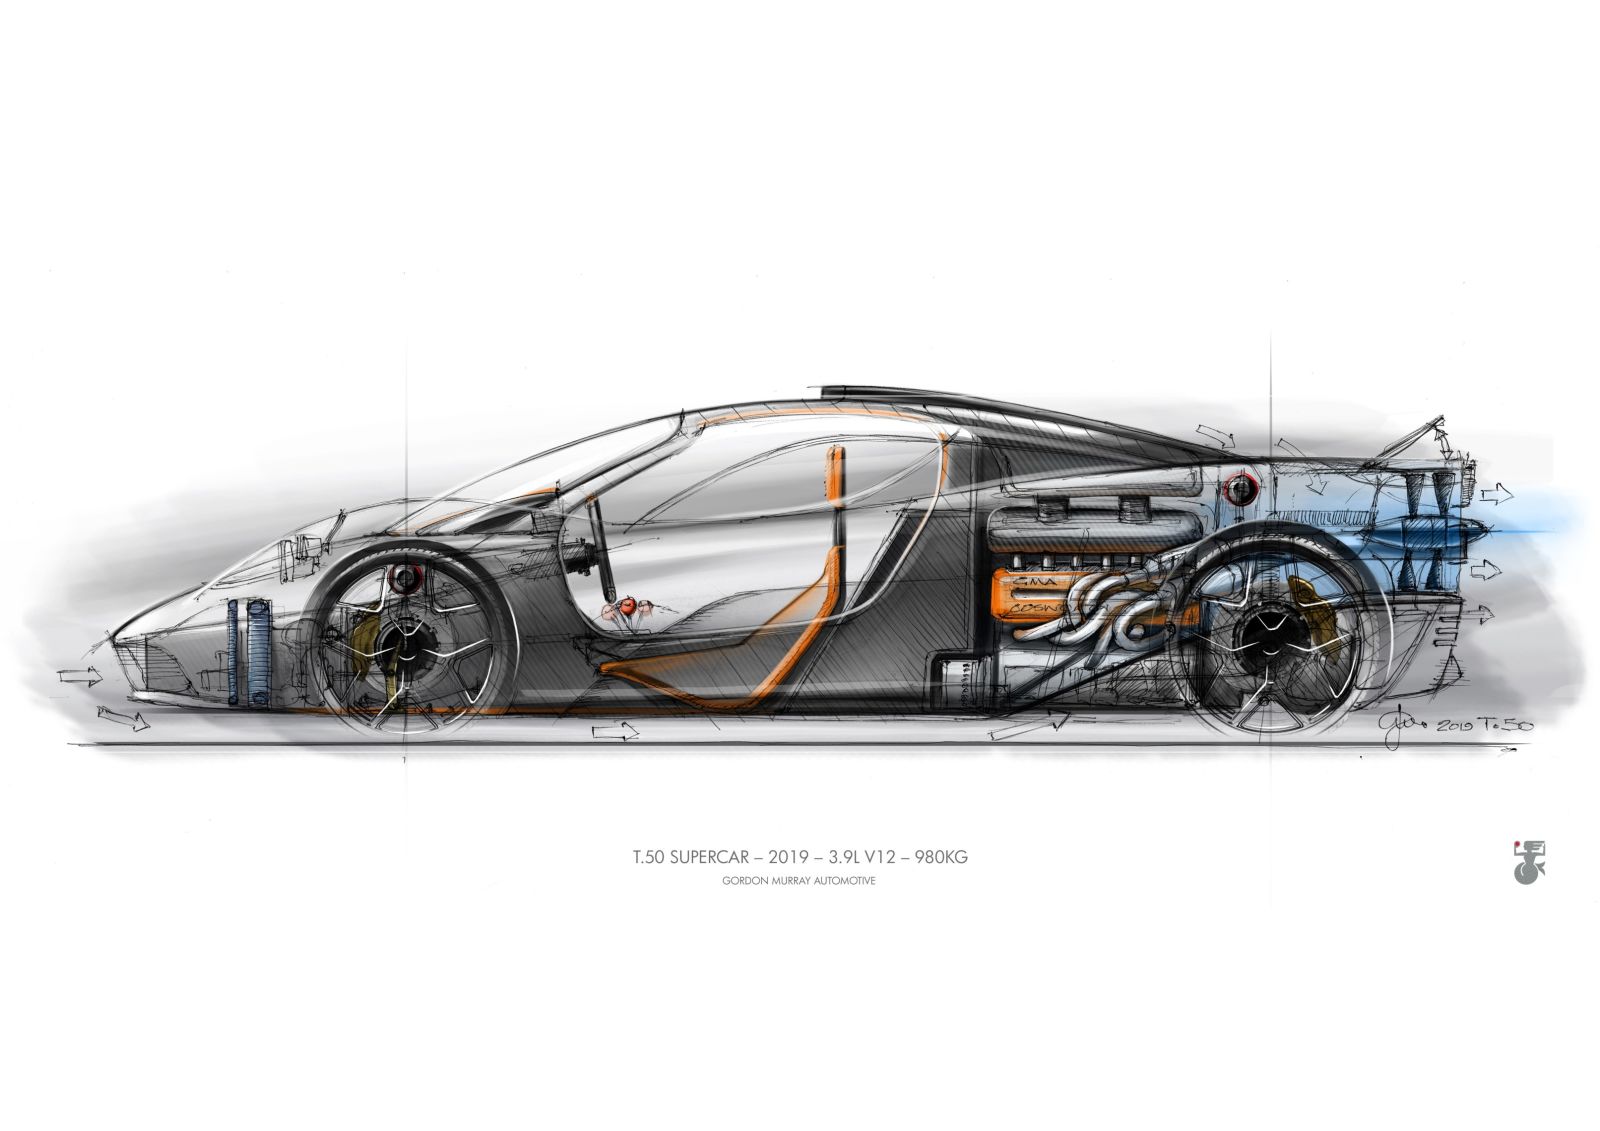 The Gordon Murray Design T.50 is the McLaren F1 2.0! Featuring a 4-Liter V12, a lightweight carbon chassis, and a fan system providing downforce, the T.50 is set to redefine with makes a supercar again.